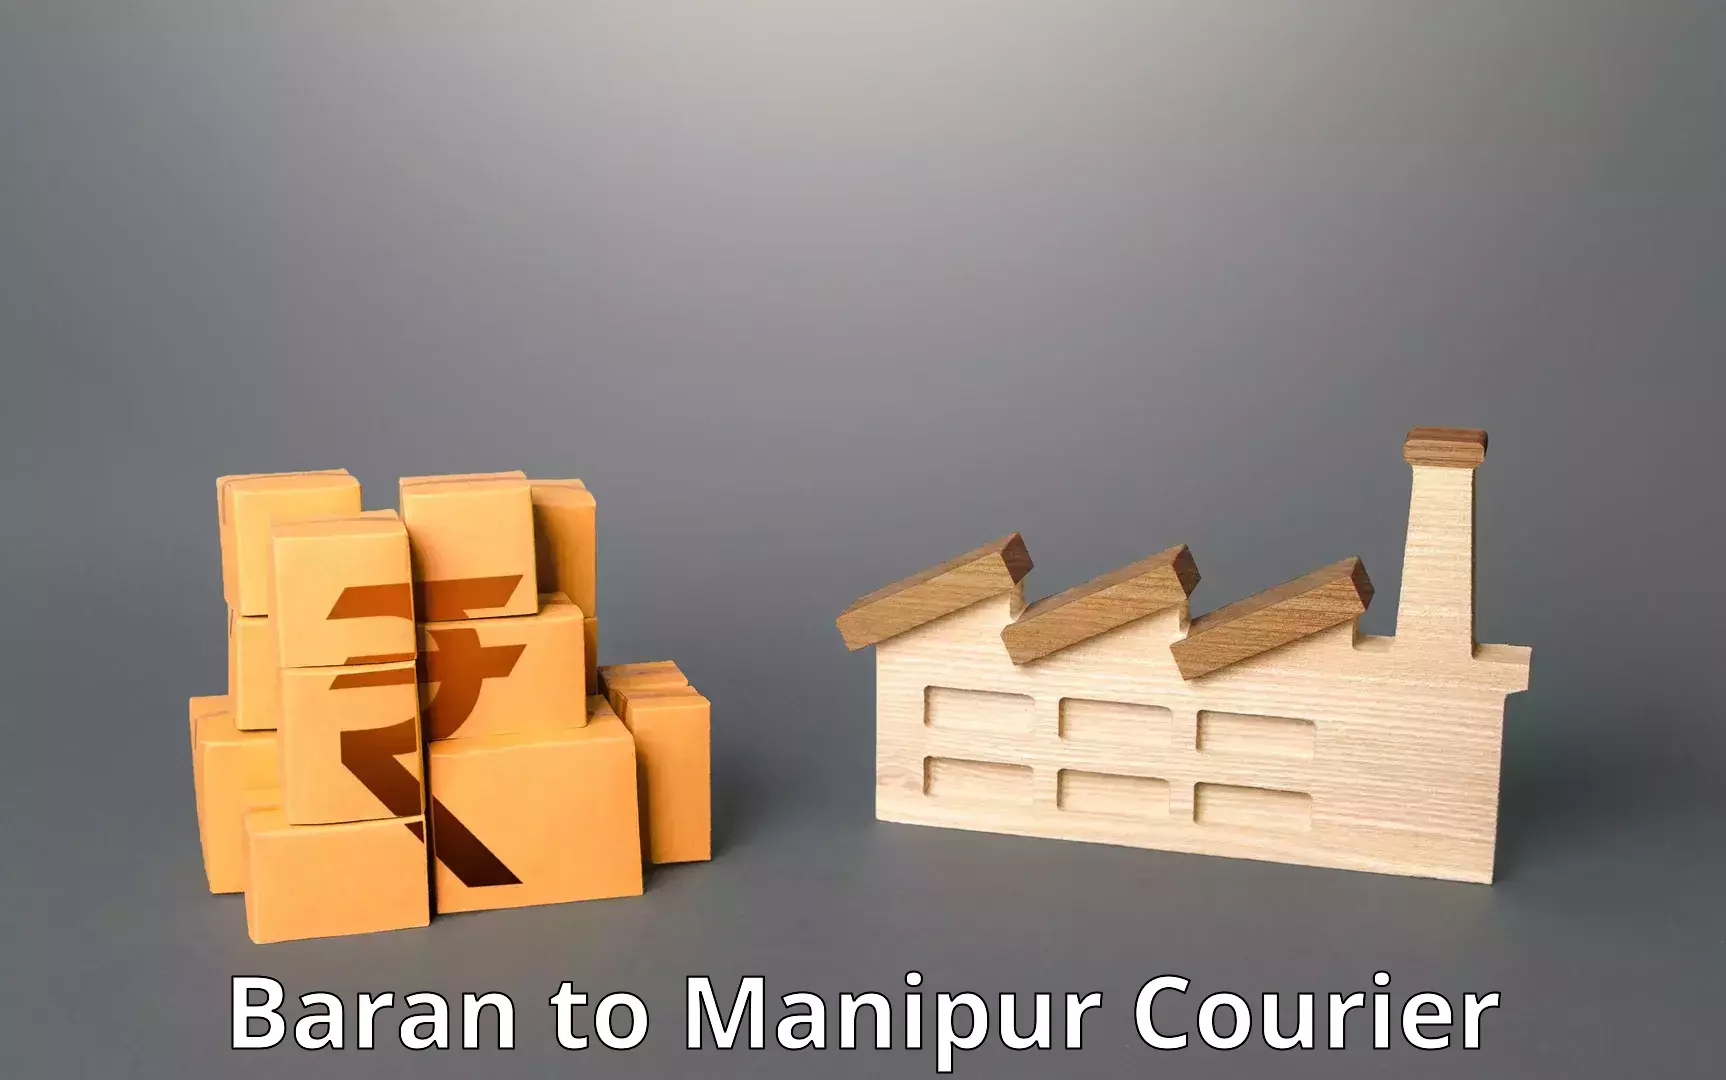 International courier networks Baran to Manipur